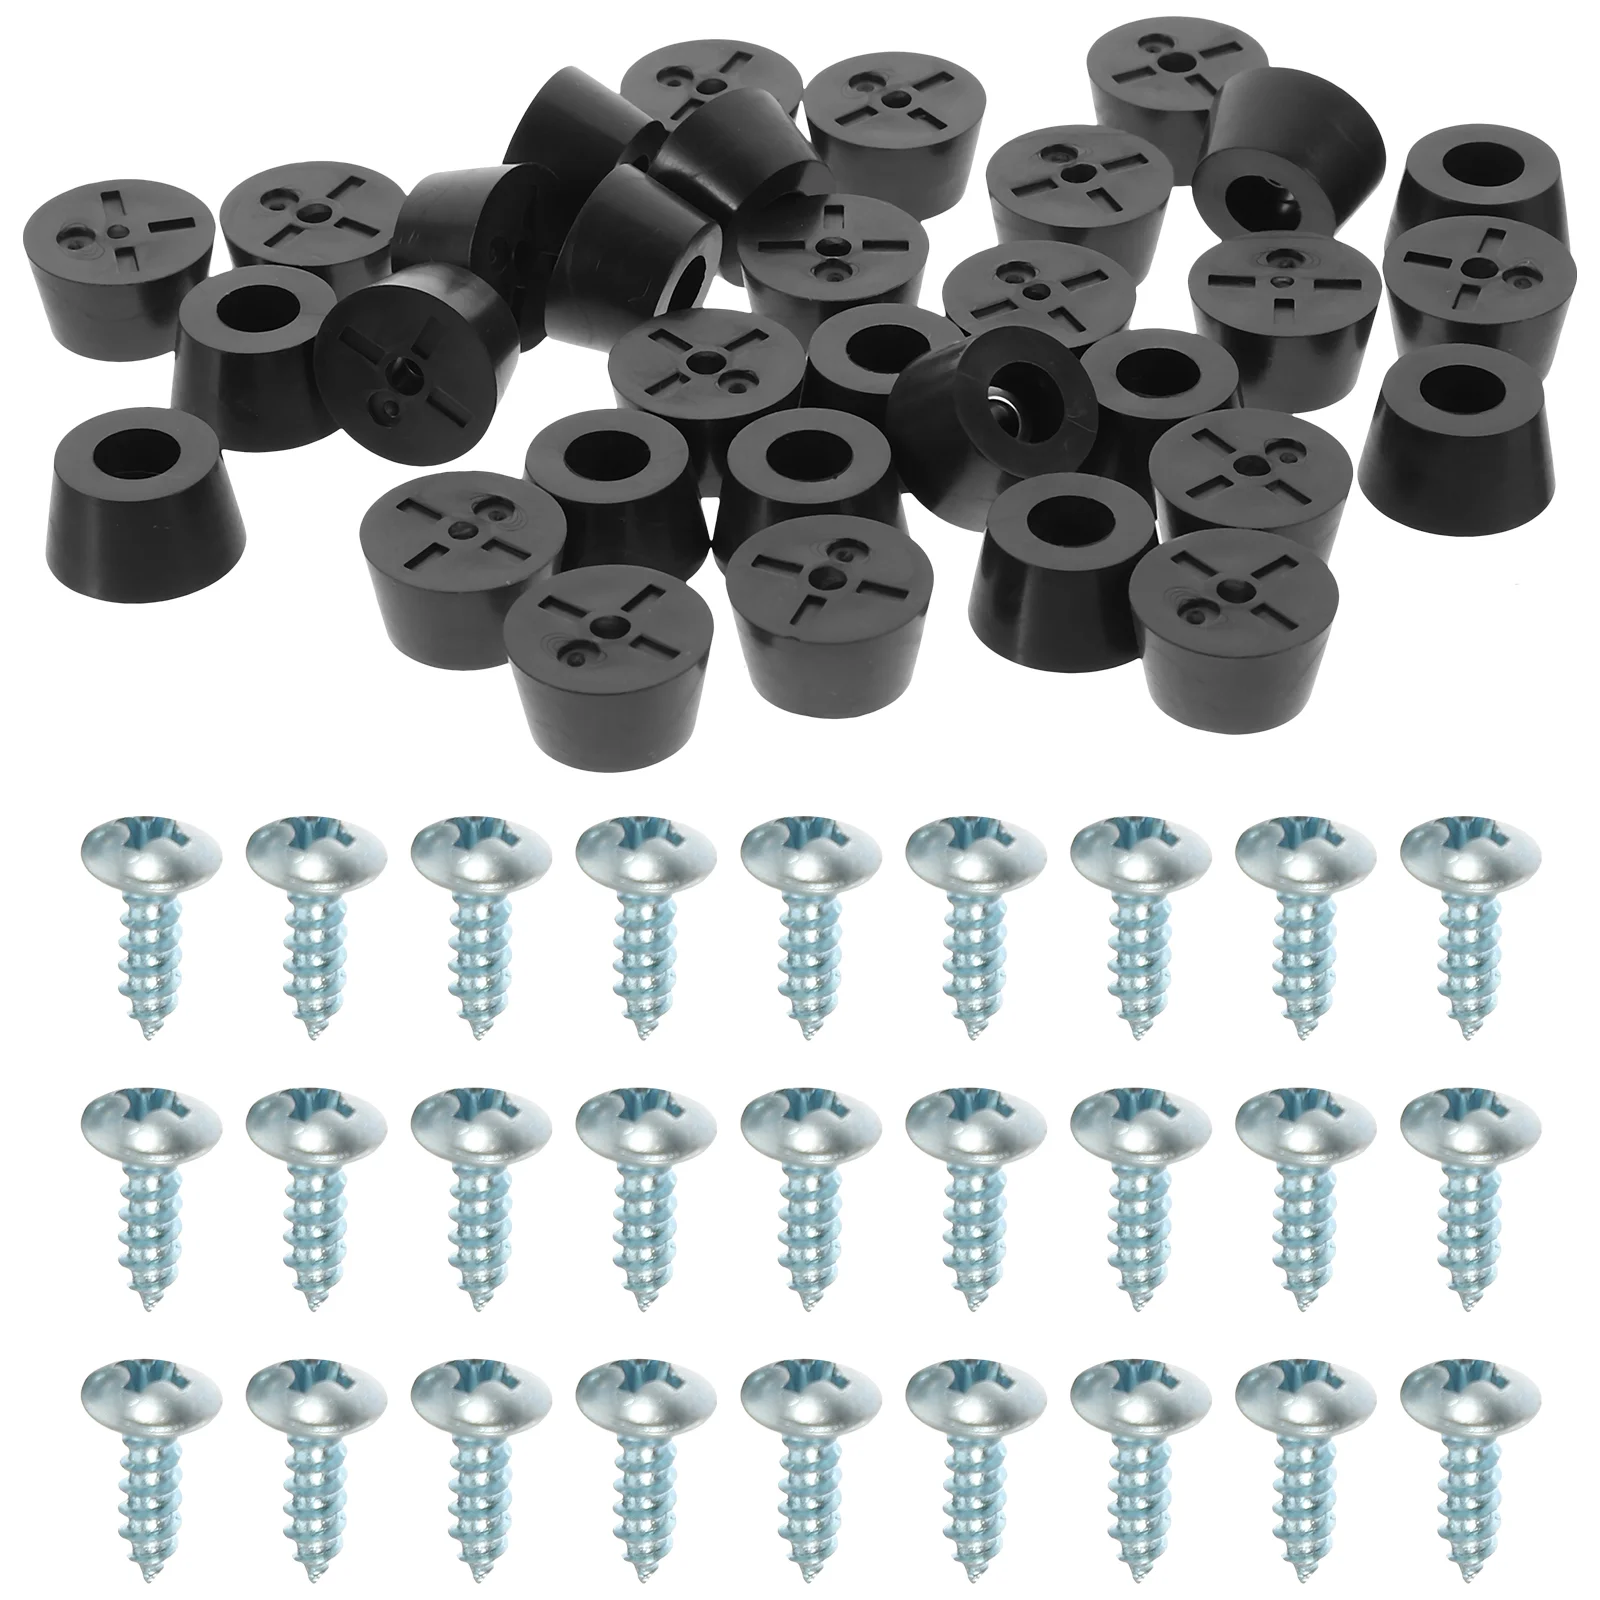 

60 Pcs Increased Furniture Heightening Pads Nail on Glides Rubber Chair Feet Protectors